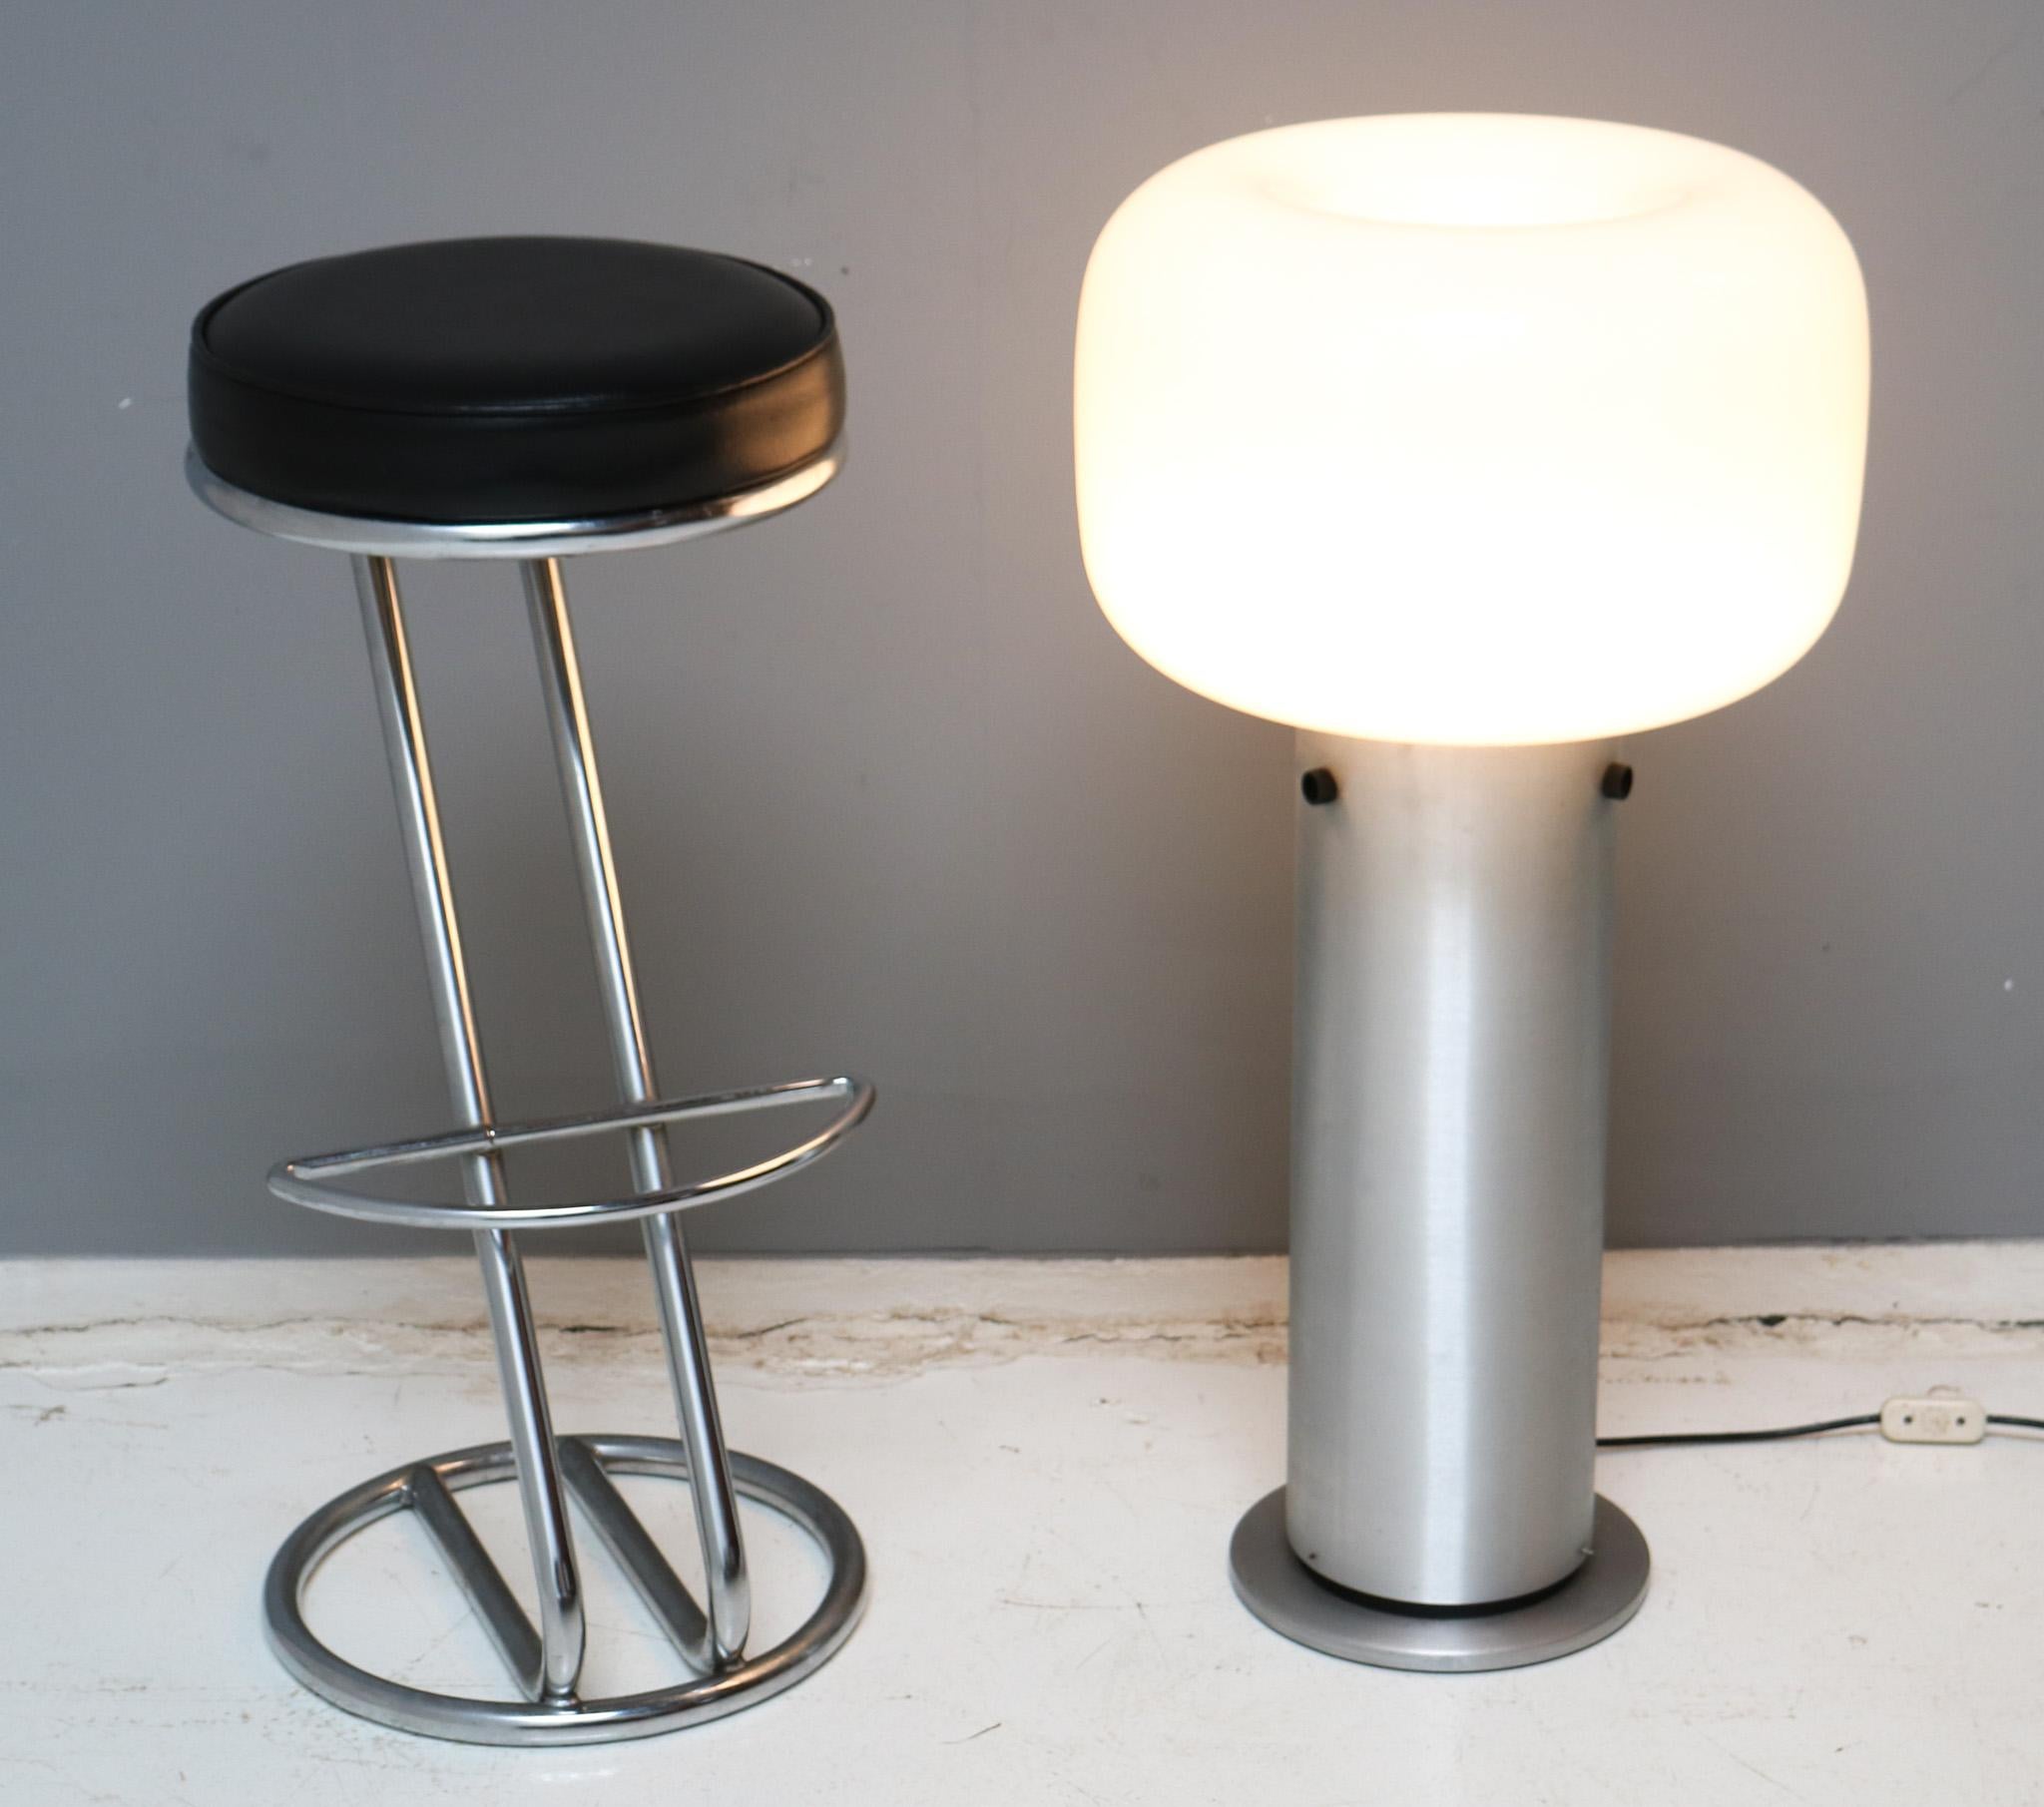 Magnificent and ultra rare Mid-Century Modern XL floor lamp.
Design by the famous Glasshütte Limburg company.
Striking German design from the 1970s.
Original brushed nickel-plated metal base with original hand-blown milk glass shade.
One original